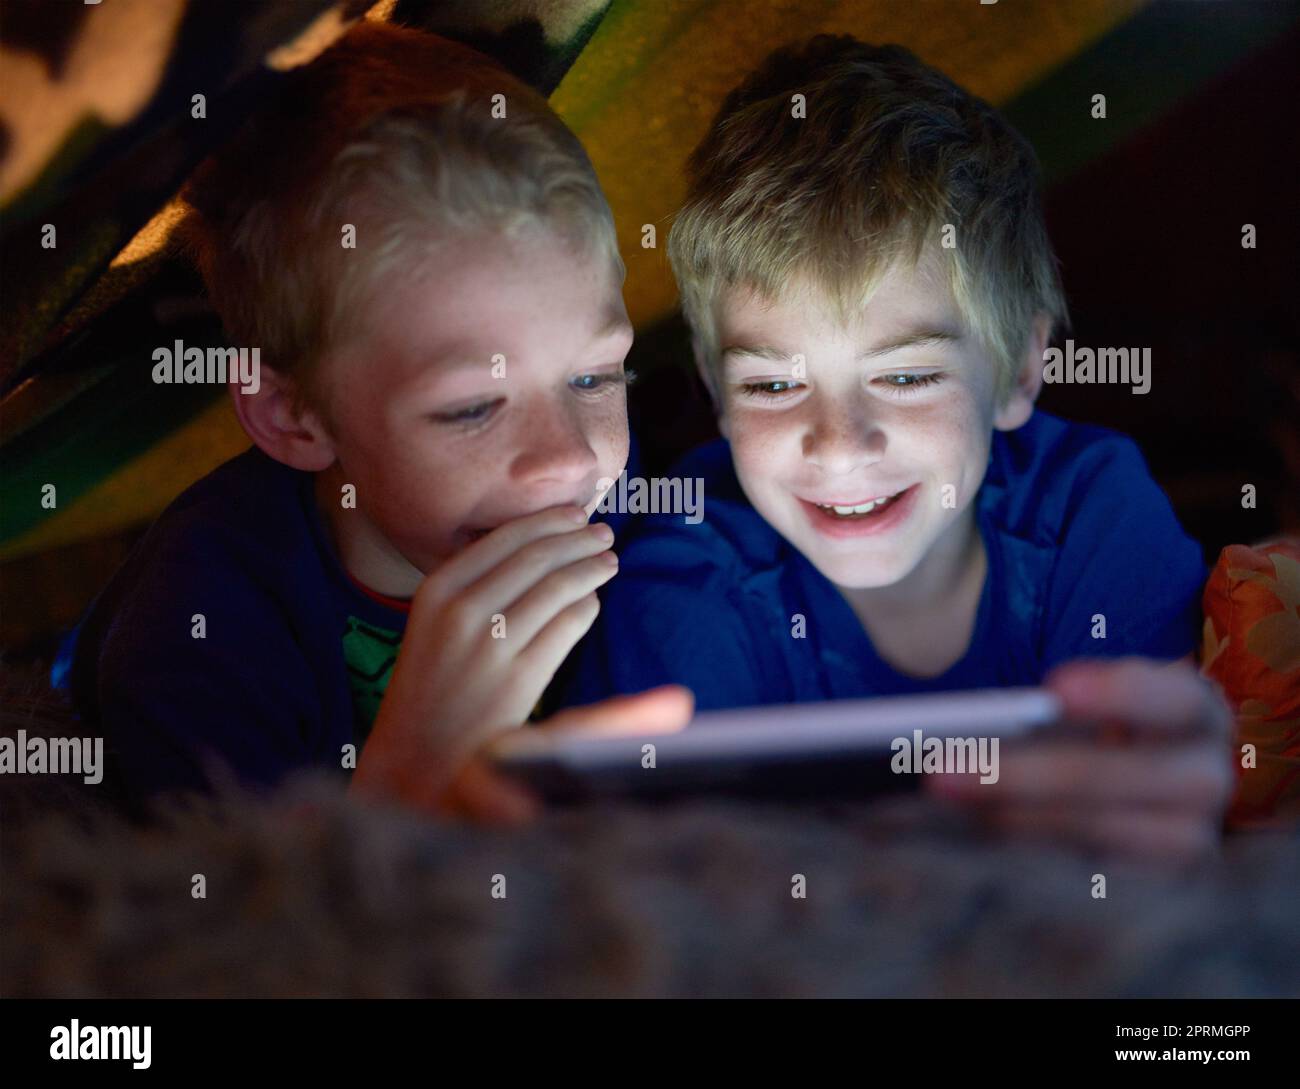 I wont tell on you if you let me play. siblings using a digital tablet under their fort at home. Stock Photo